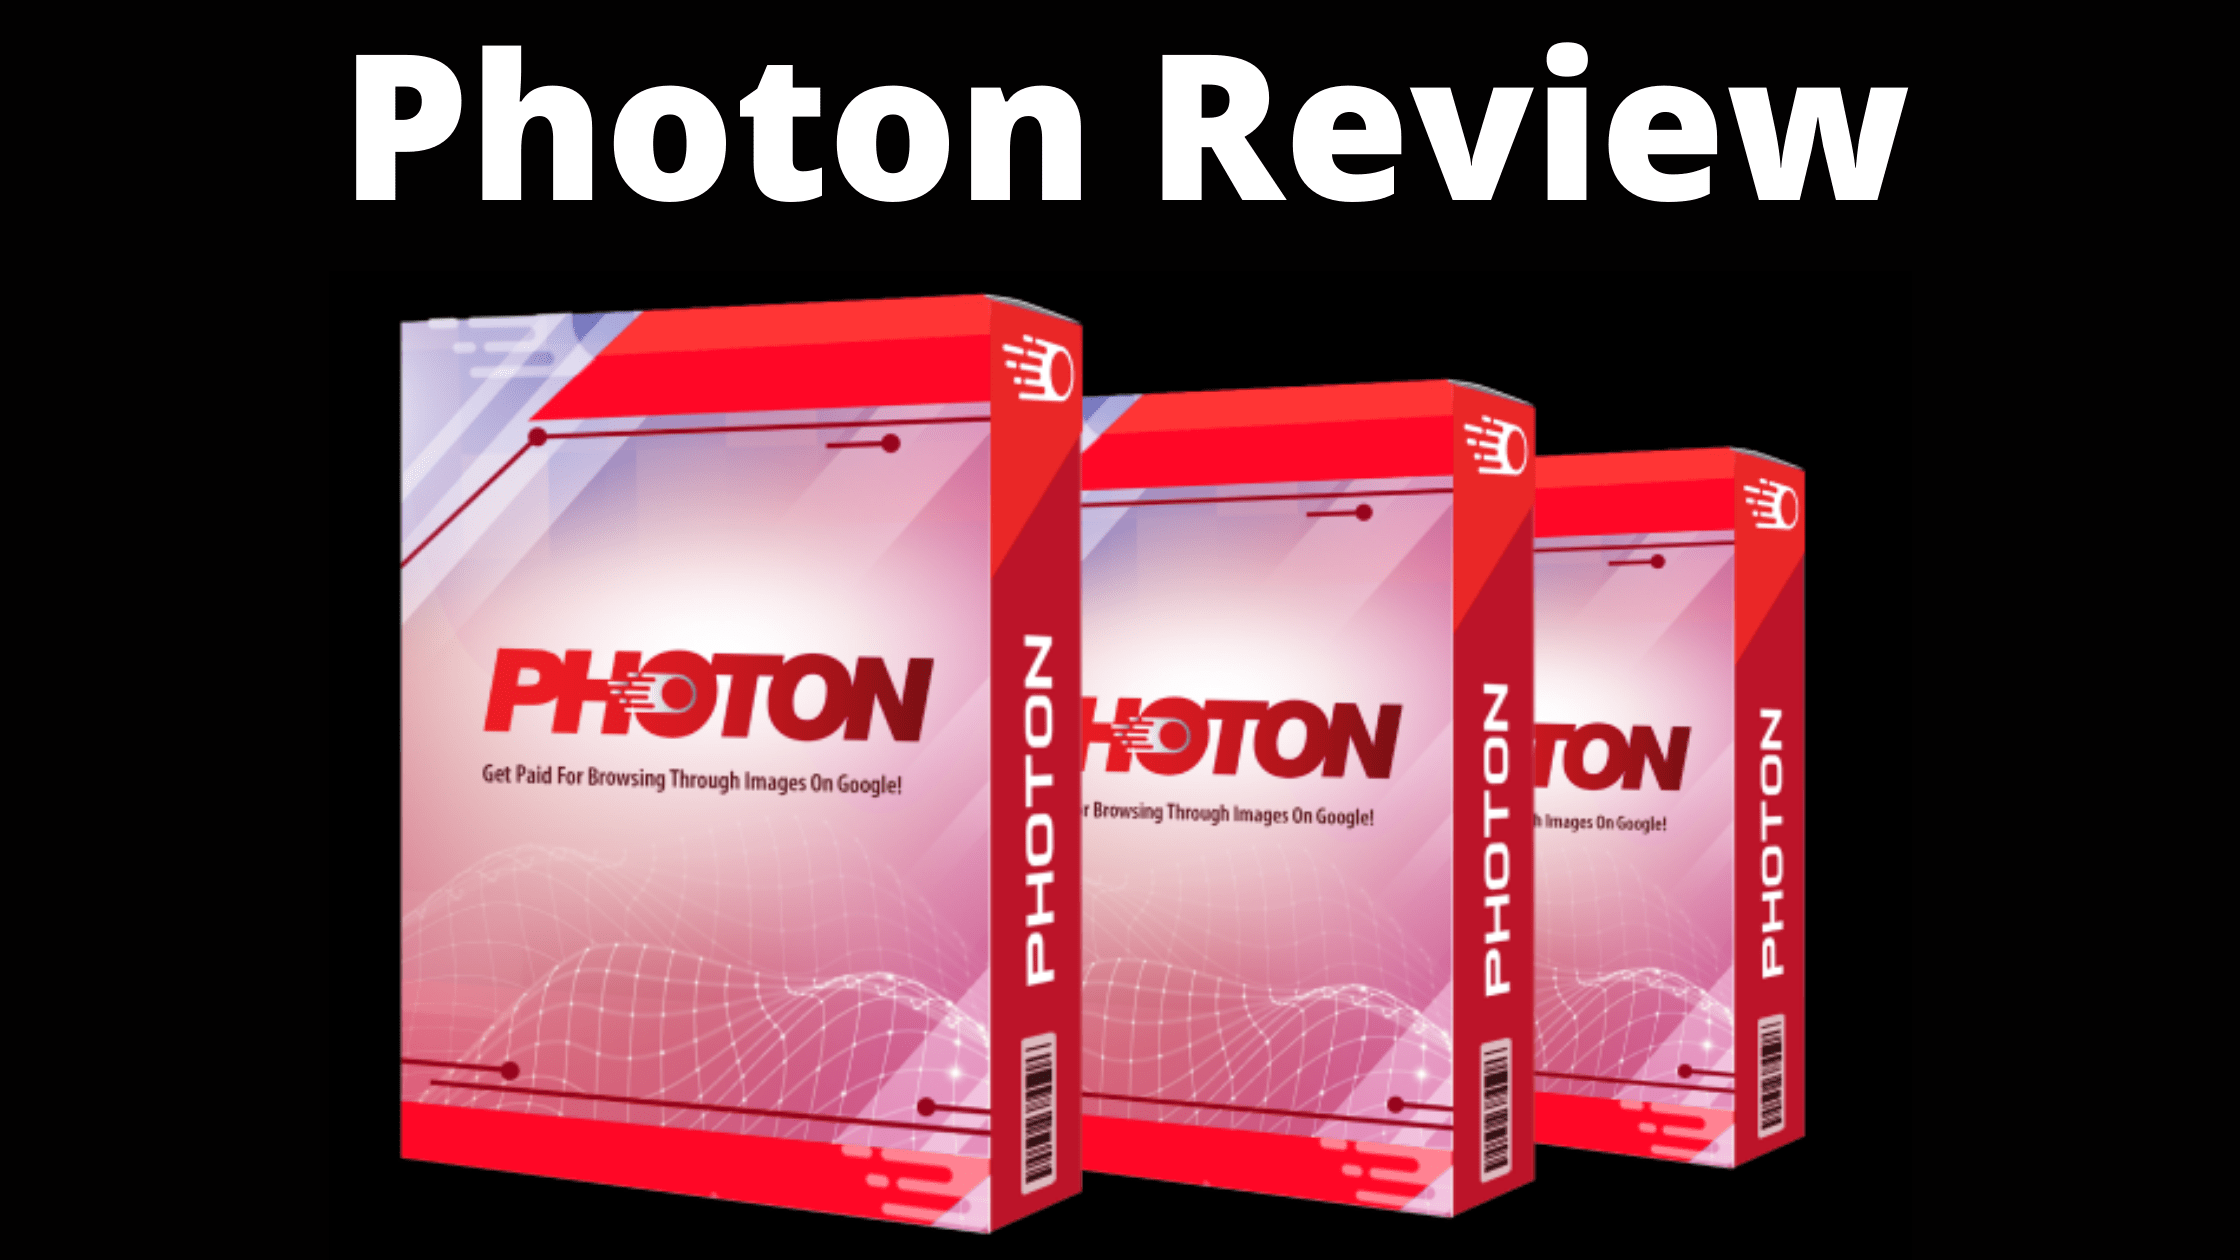 Photon Review